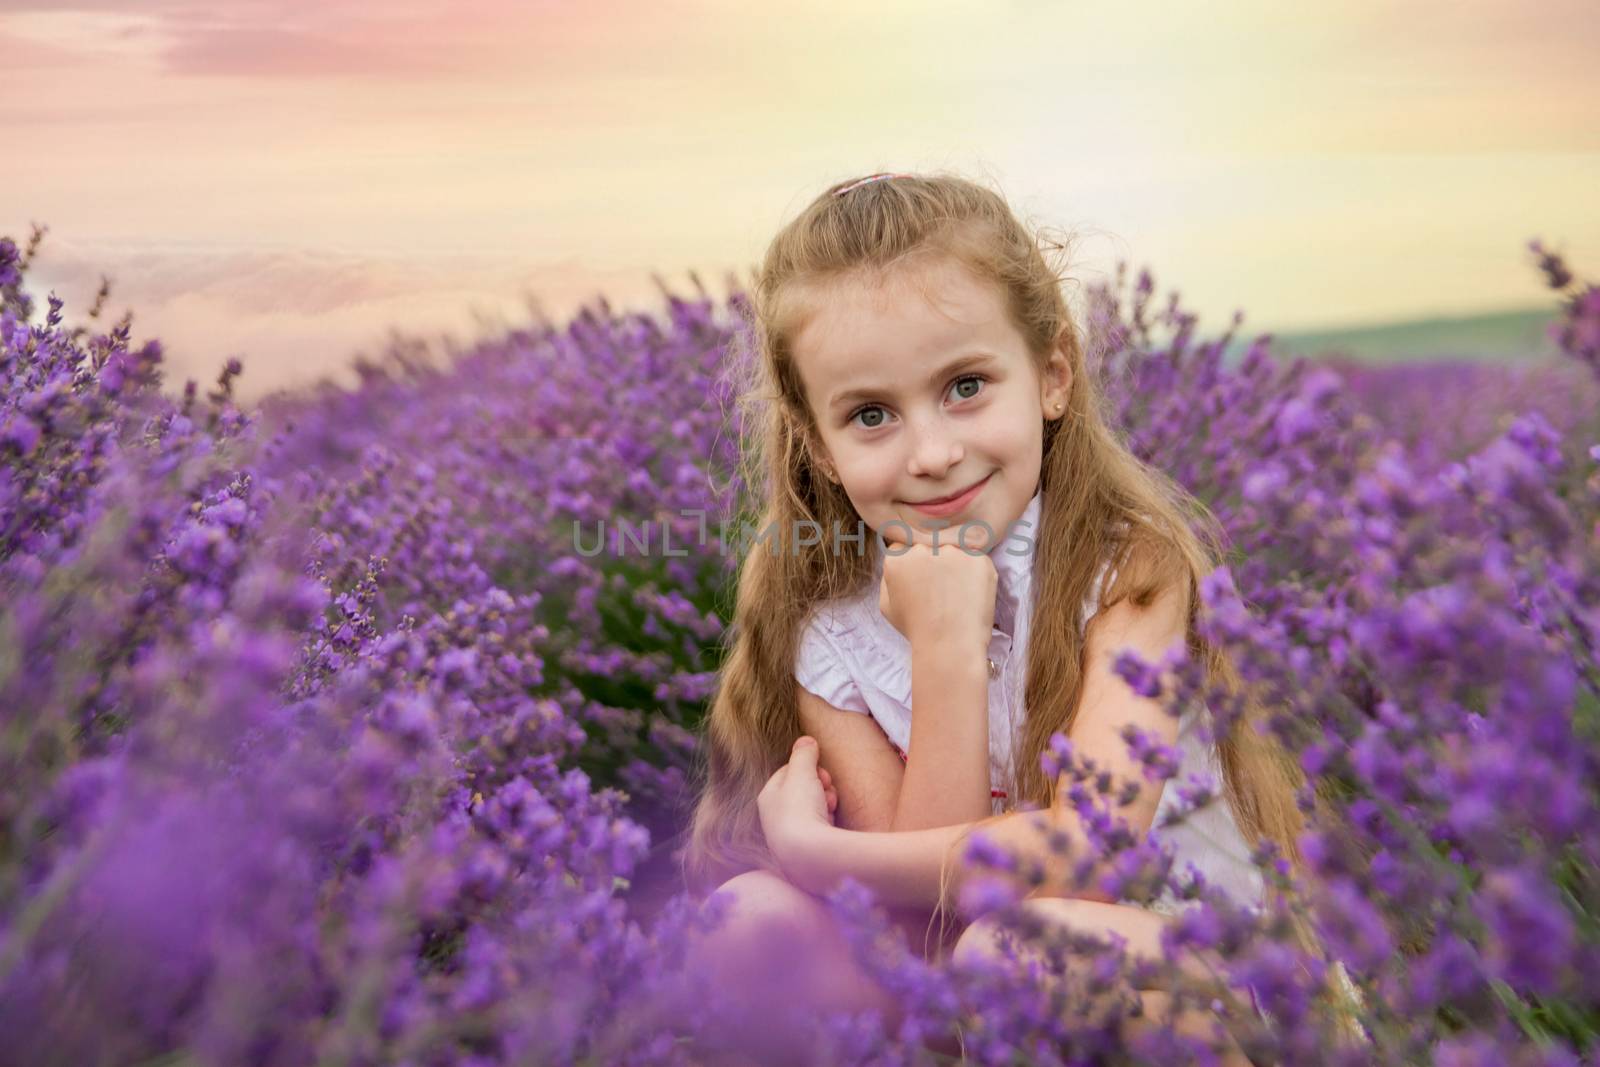 Girl in lavender field at sunset by Angel_a